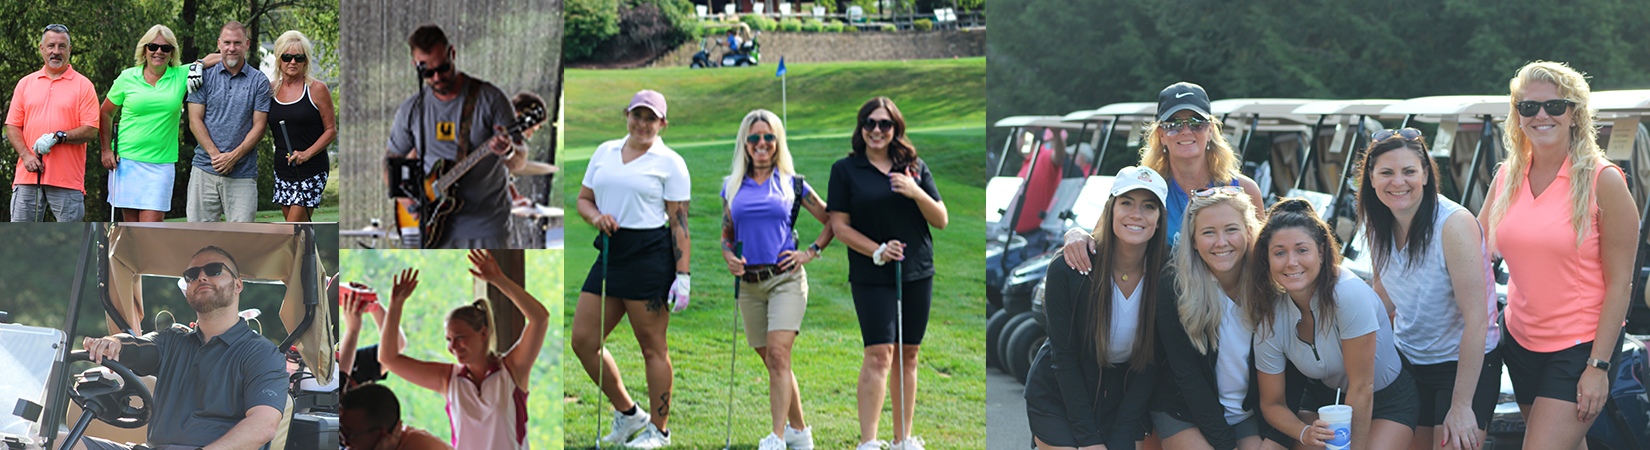 Golf-Outing-Web-Banner2